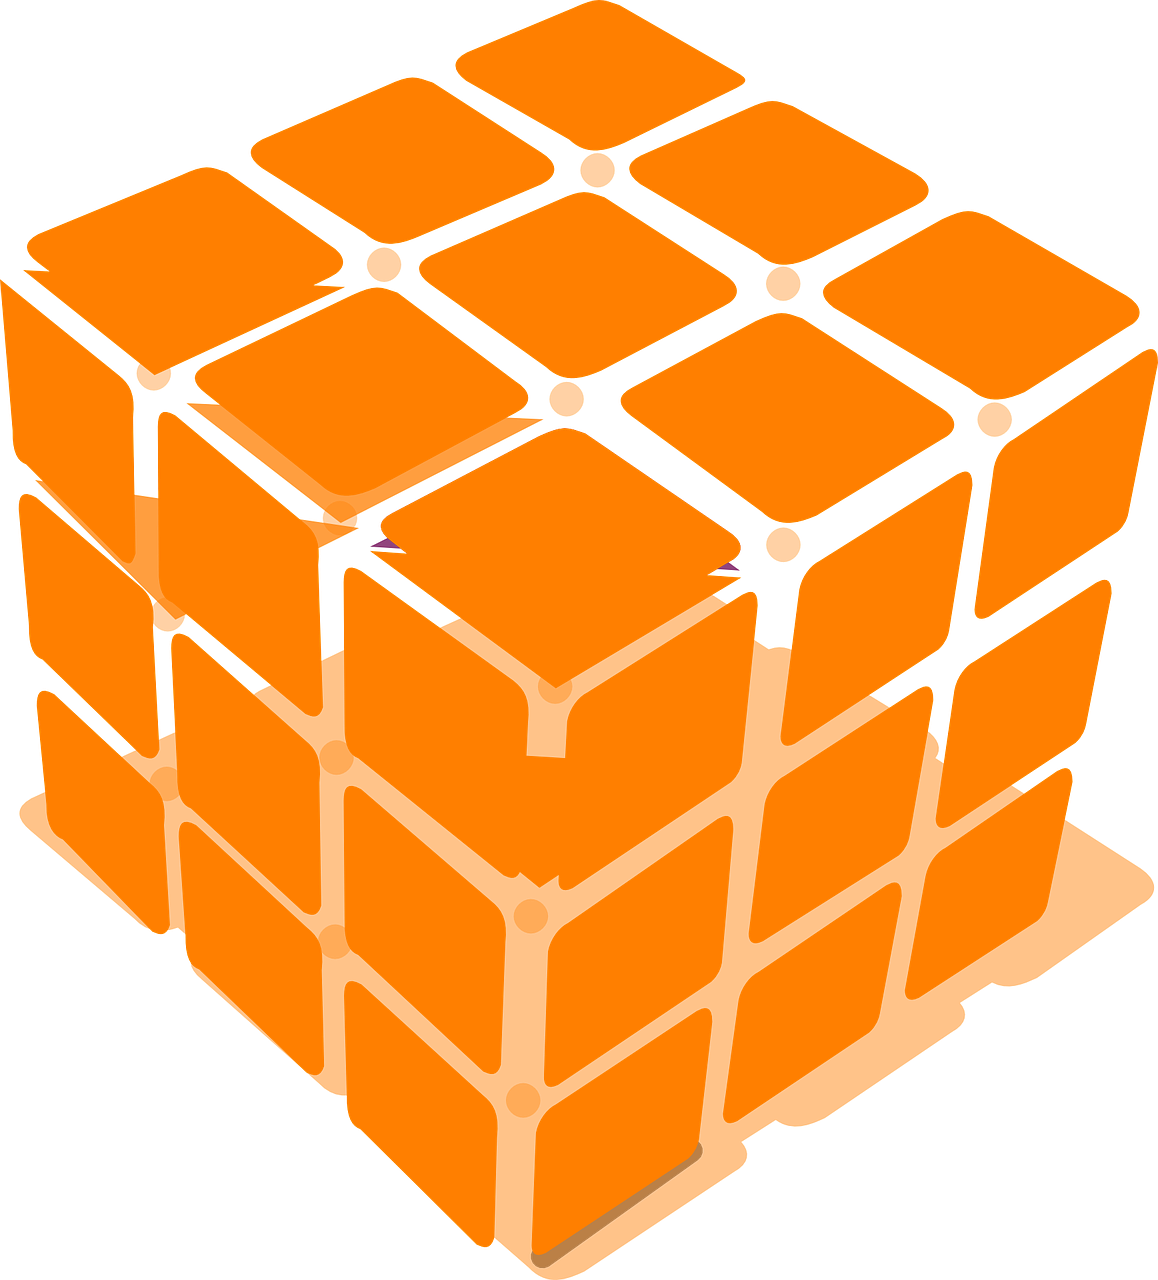 a pile of orange cubes stacked on top of each other, a raytraced image, inspired by Ernő Rubik, reddit, cubo-futurism, black backround. inkscape, style of mirror\'s edge, balloon, seen from straight above